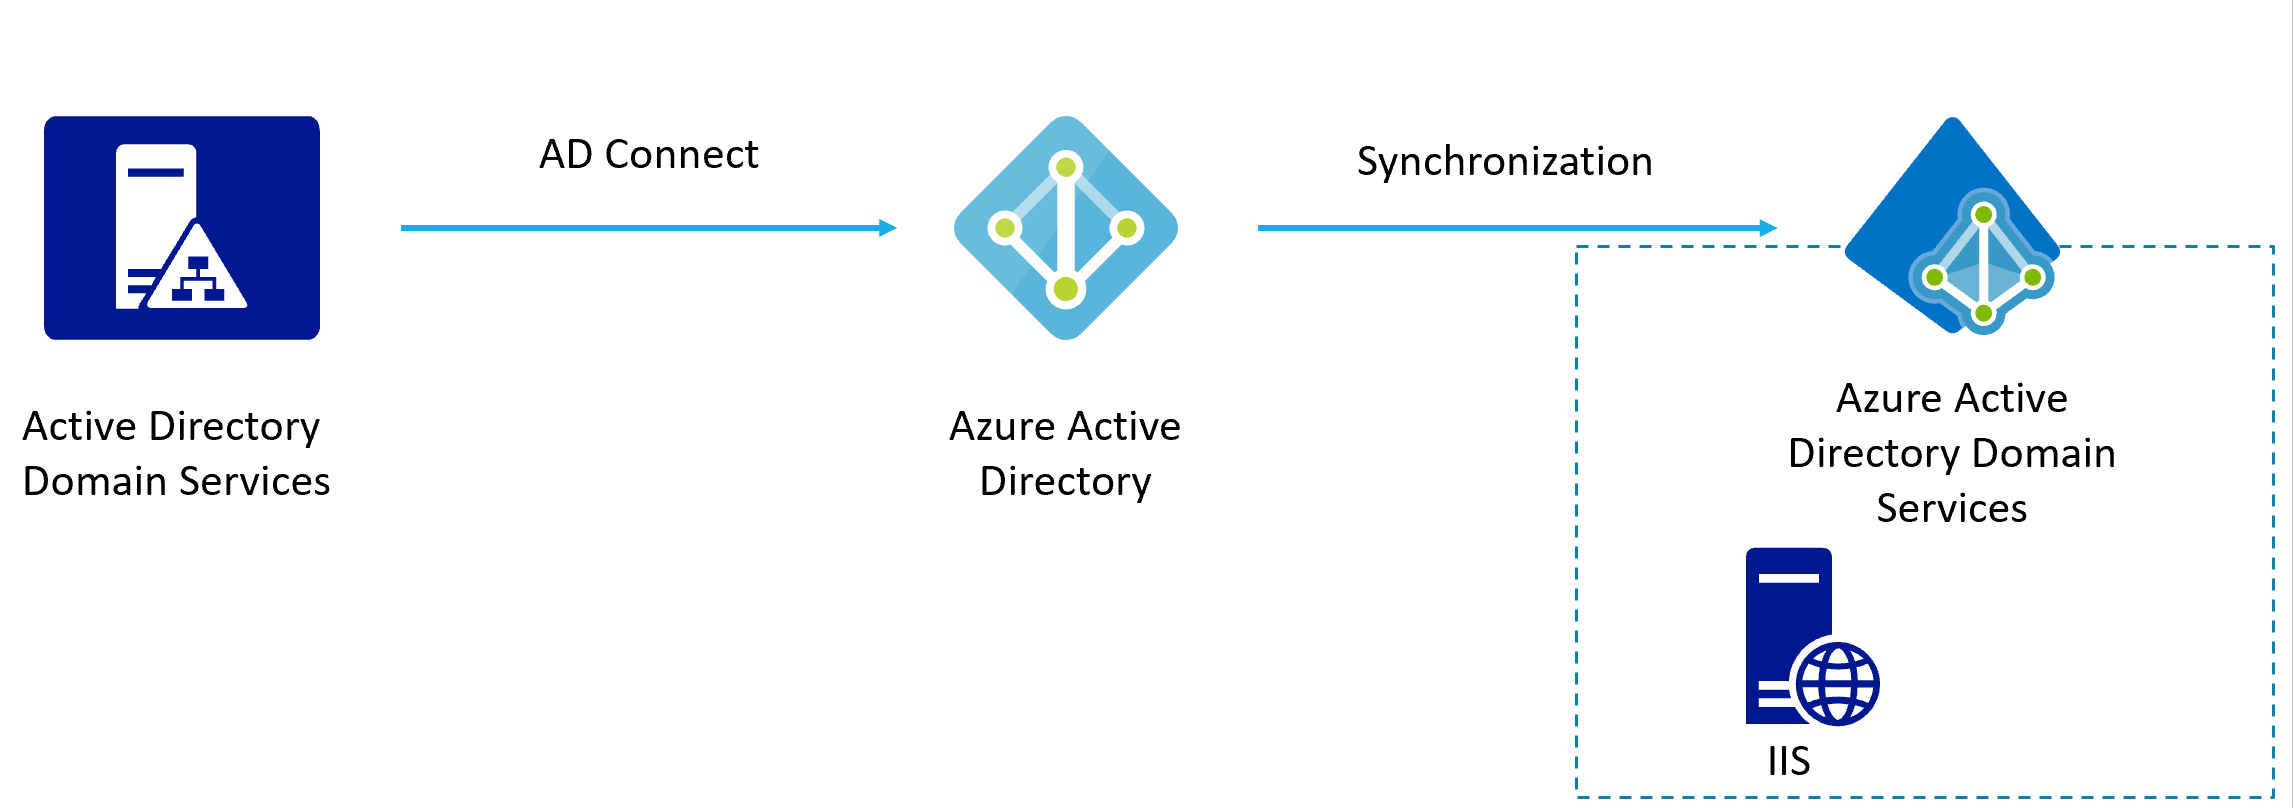 what is the active directory domain services